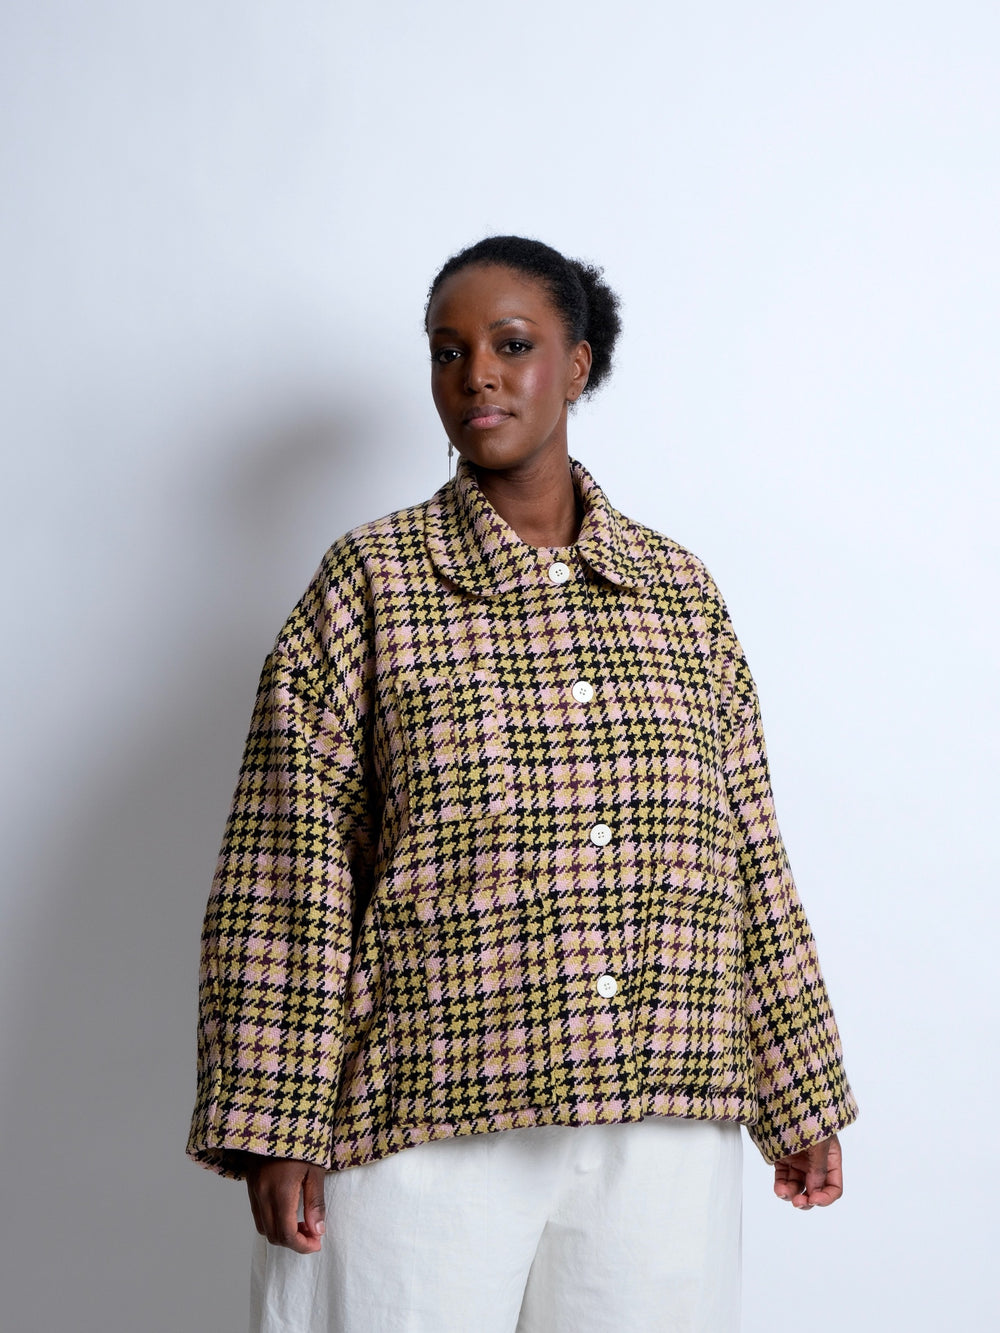 Woman wearing the ZW Bell Jacket sewing pattern from Birgitta Helmersson on The Fold Line. A lined jacket pattern made in wool, heavy weight denim or heavy cotton drill fabrics, featuring an oversized silhouette, rounded collar, front button closure, patc